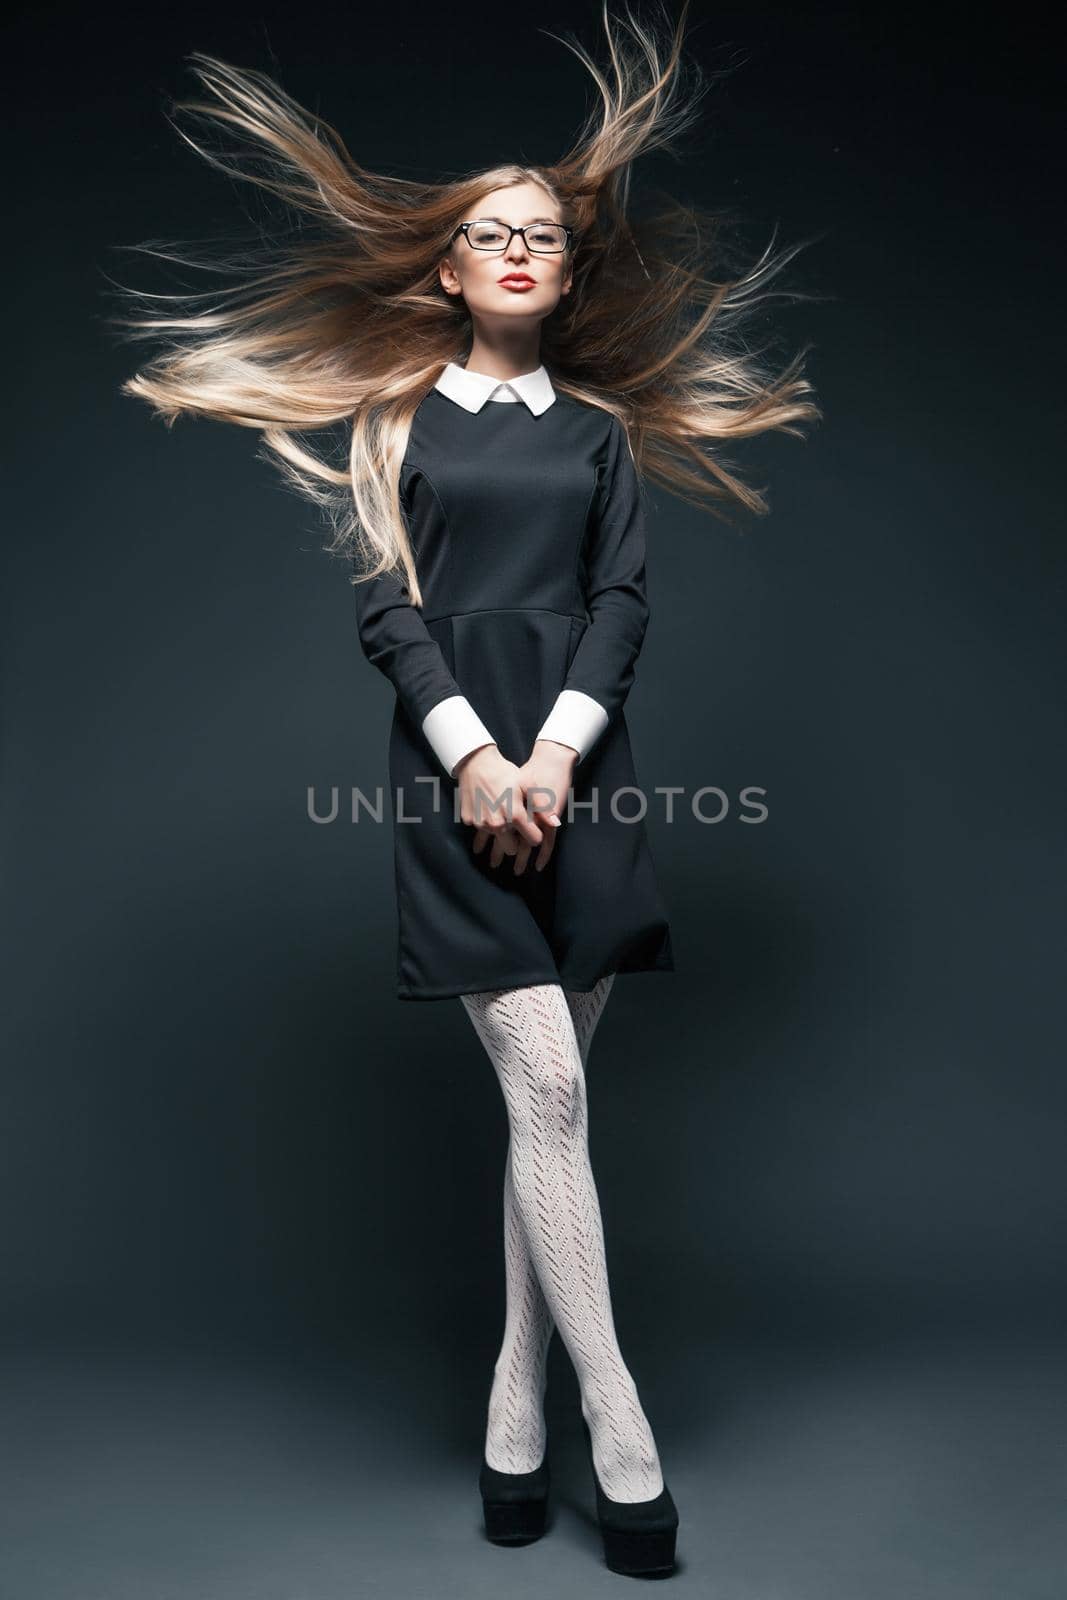 portrait of blonde young beautiful posing woman wearing eyeglasses and black dress with white collar. Her long hair fluttering in wind and legs crossed.